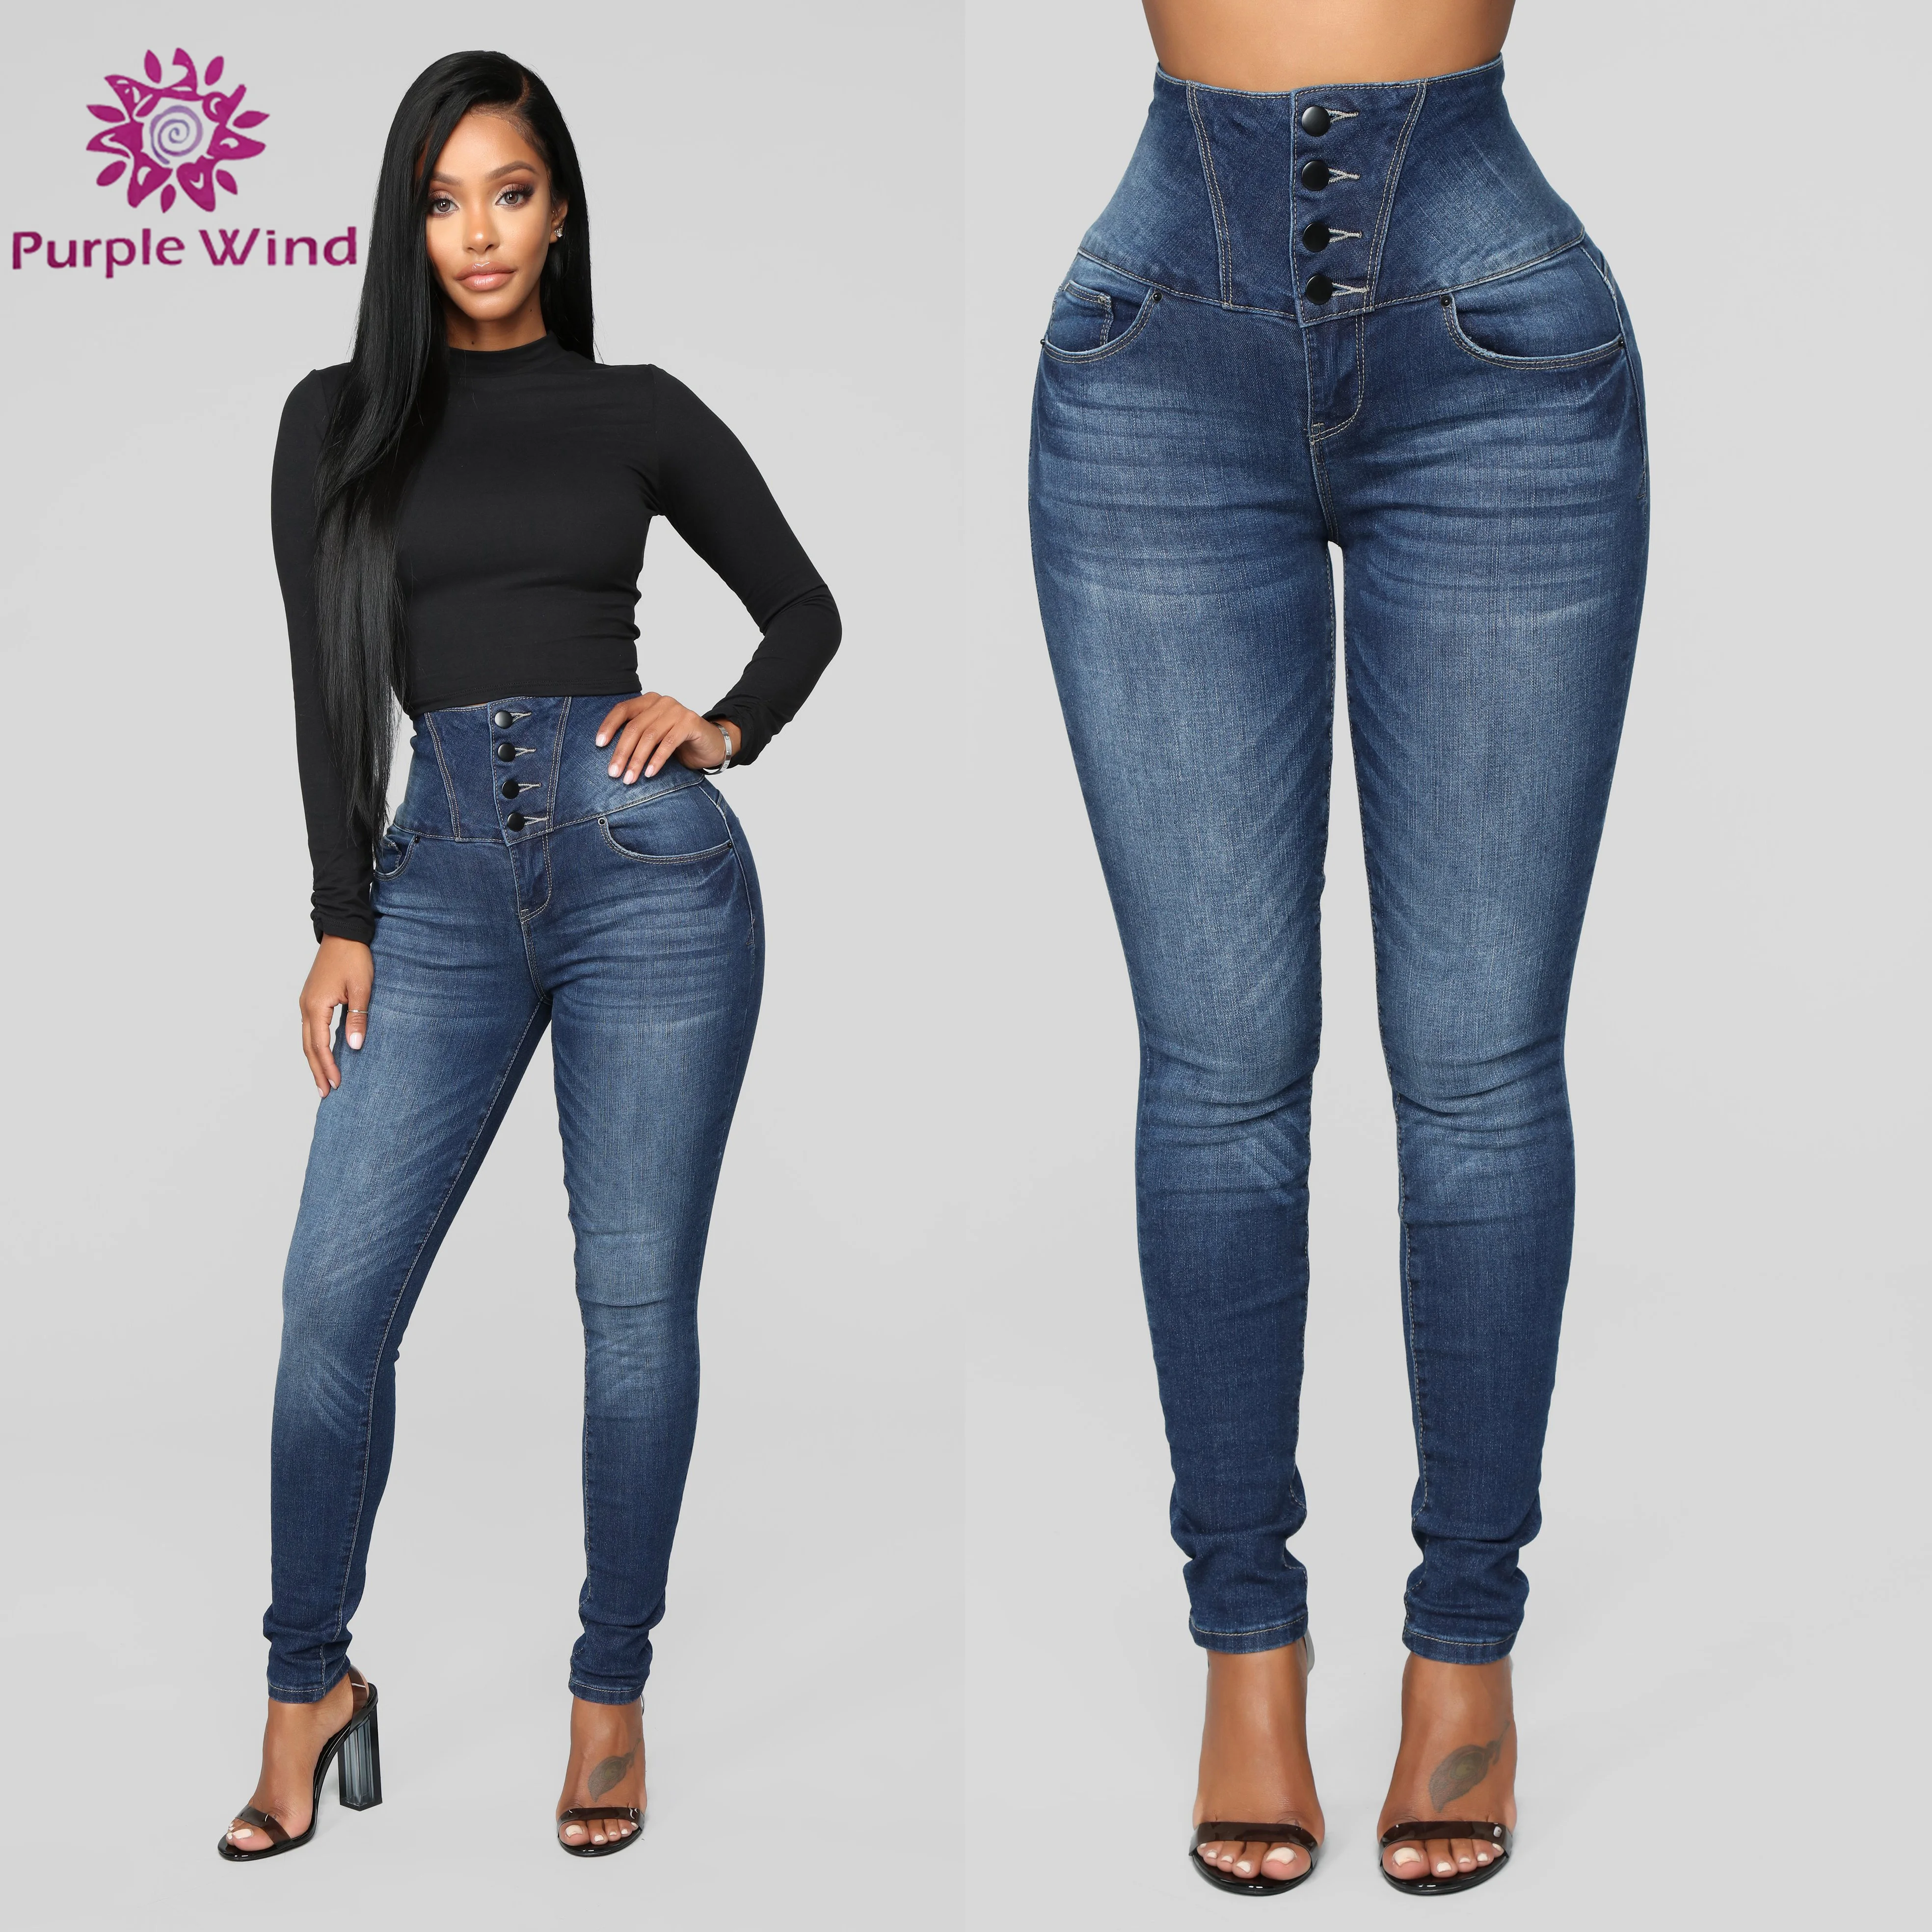 repetitie keuken Omtrek High Waist With 4 Button Skinny Wholesale Colombian Jeans For Womens - Buy Colombian  Jeans,Skinny Jeans For Women,Wholesale High Waist Jeans Product on  Alibaba.com